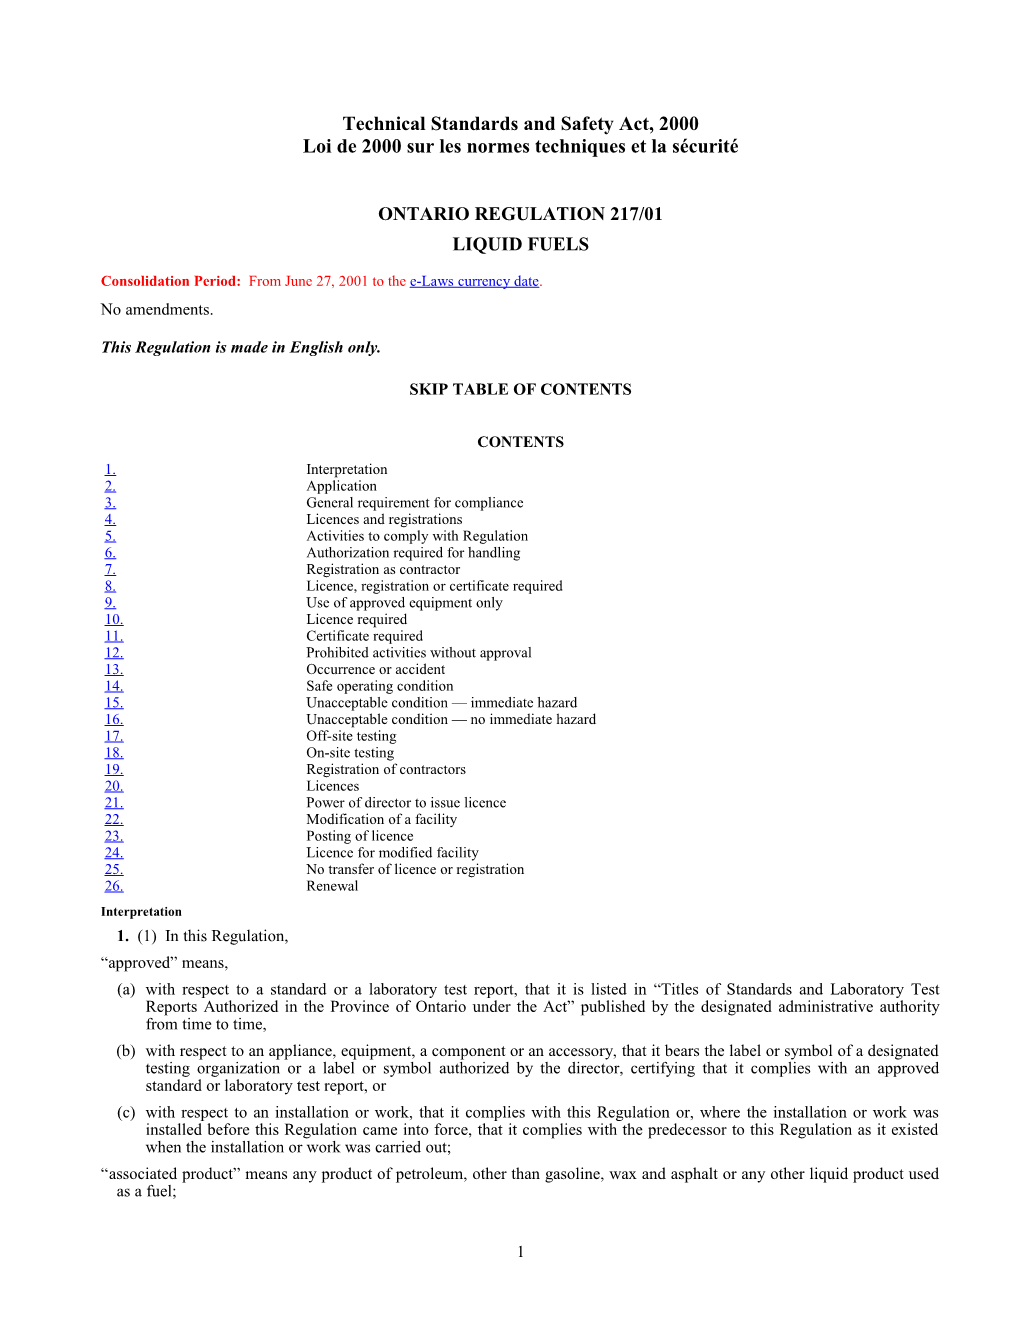 Technical Standards and Safety Act, 2000 - O. Reg. 217/01